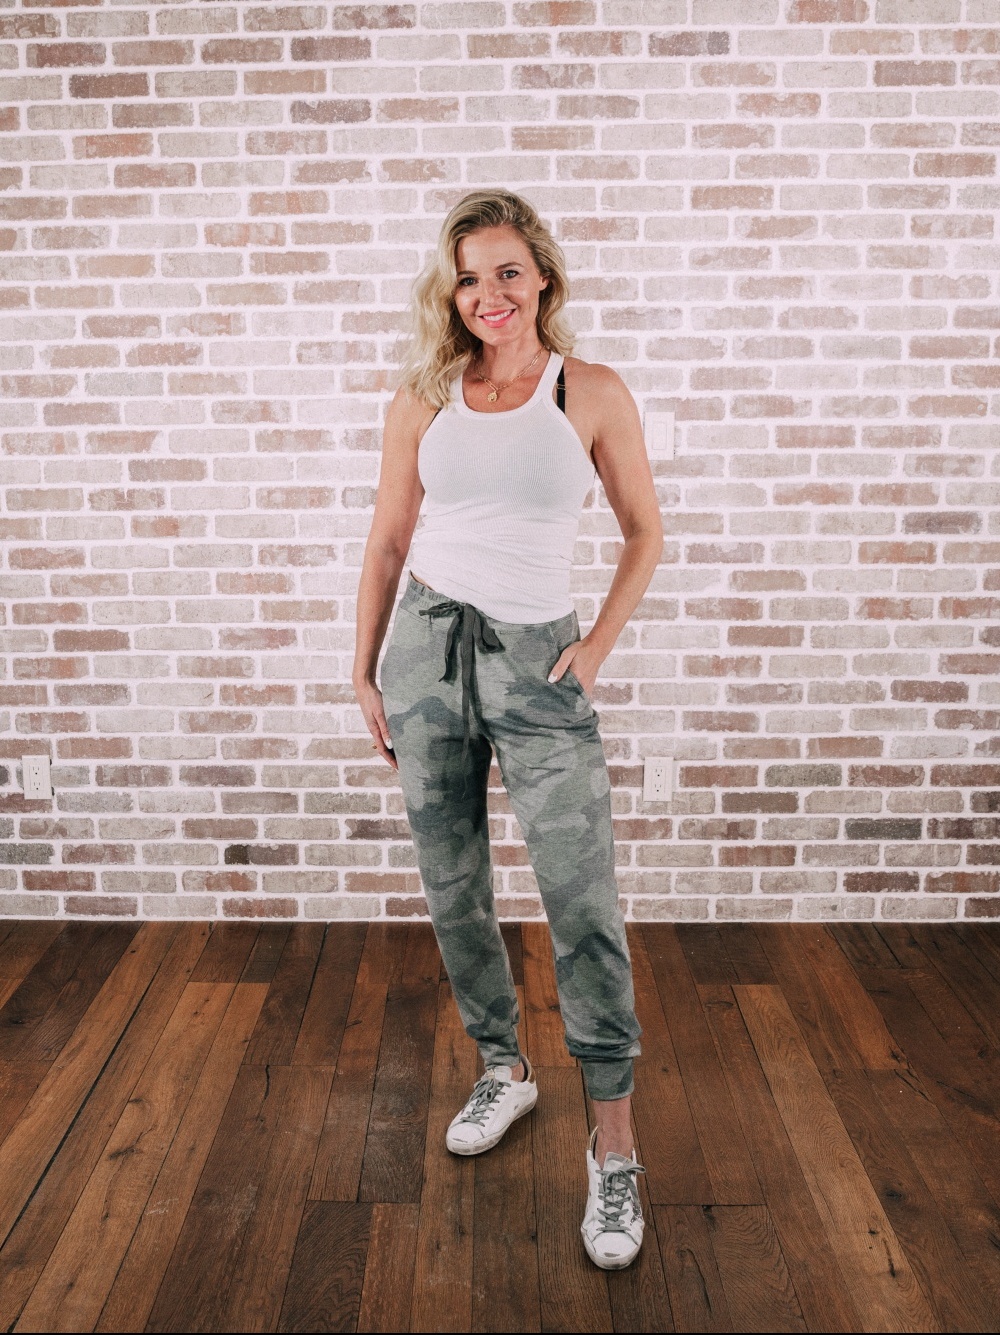 Loungewear Outfits, Fashion blogger Erin Busbee of BusbeeStyle.com sharing her favorite loungewear including a white tank and camo joggers by Sundry in Telluride, Colorado, stylish lazy day outfits